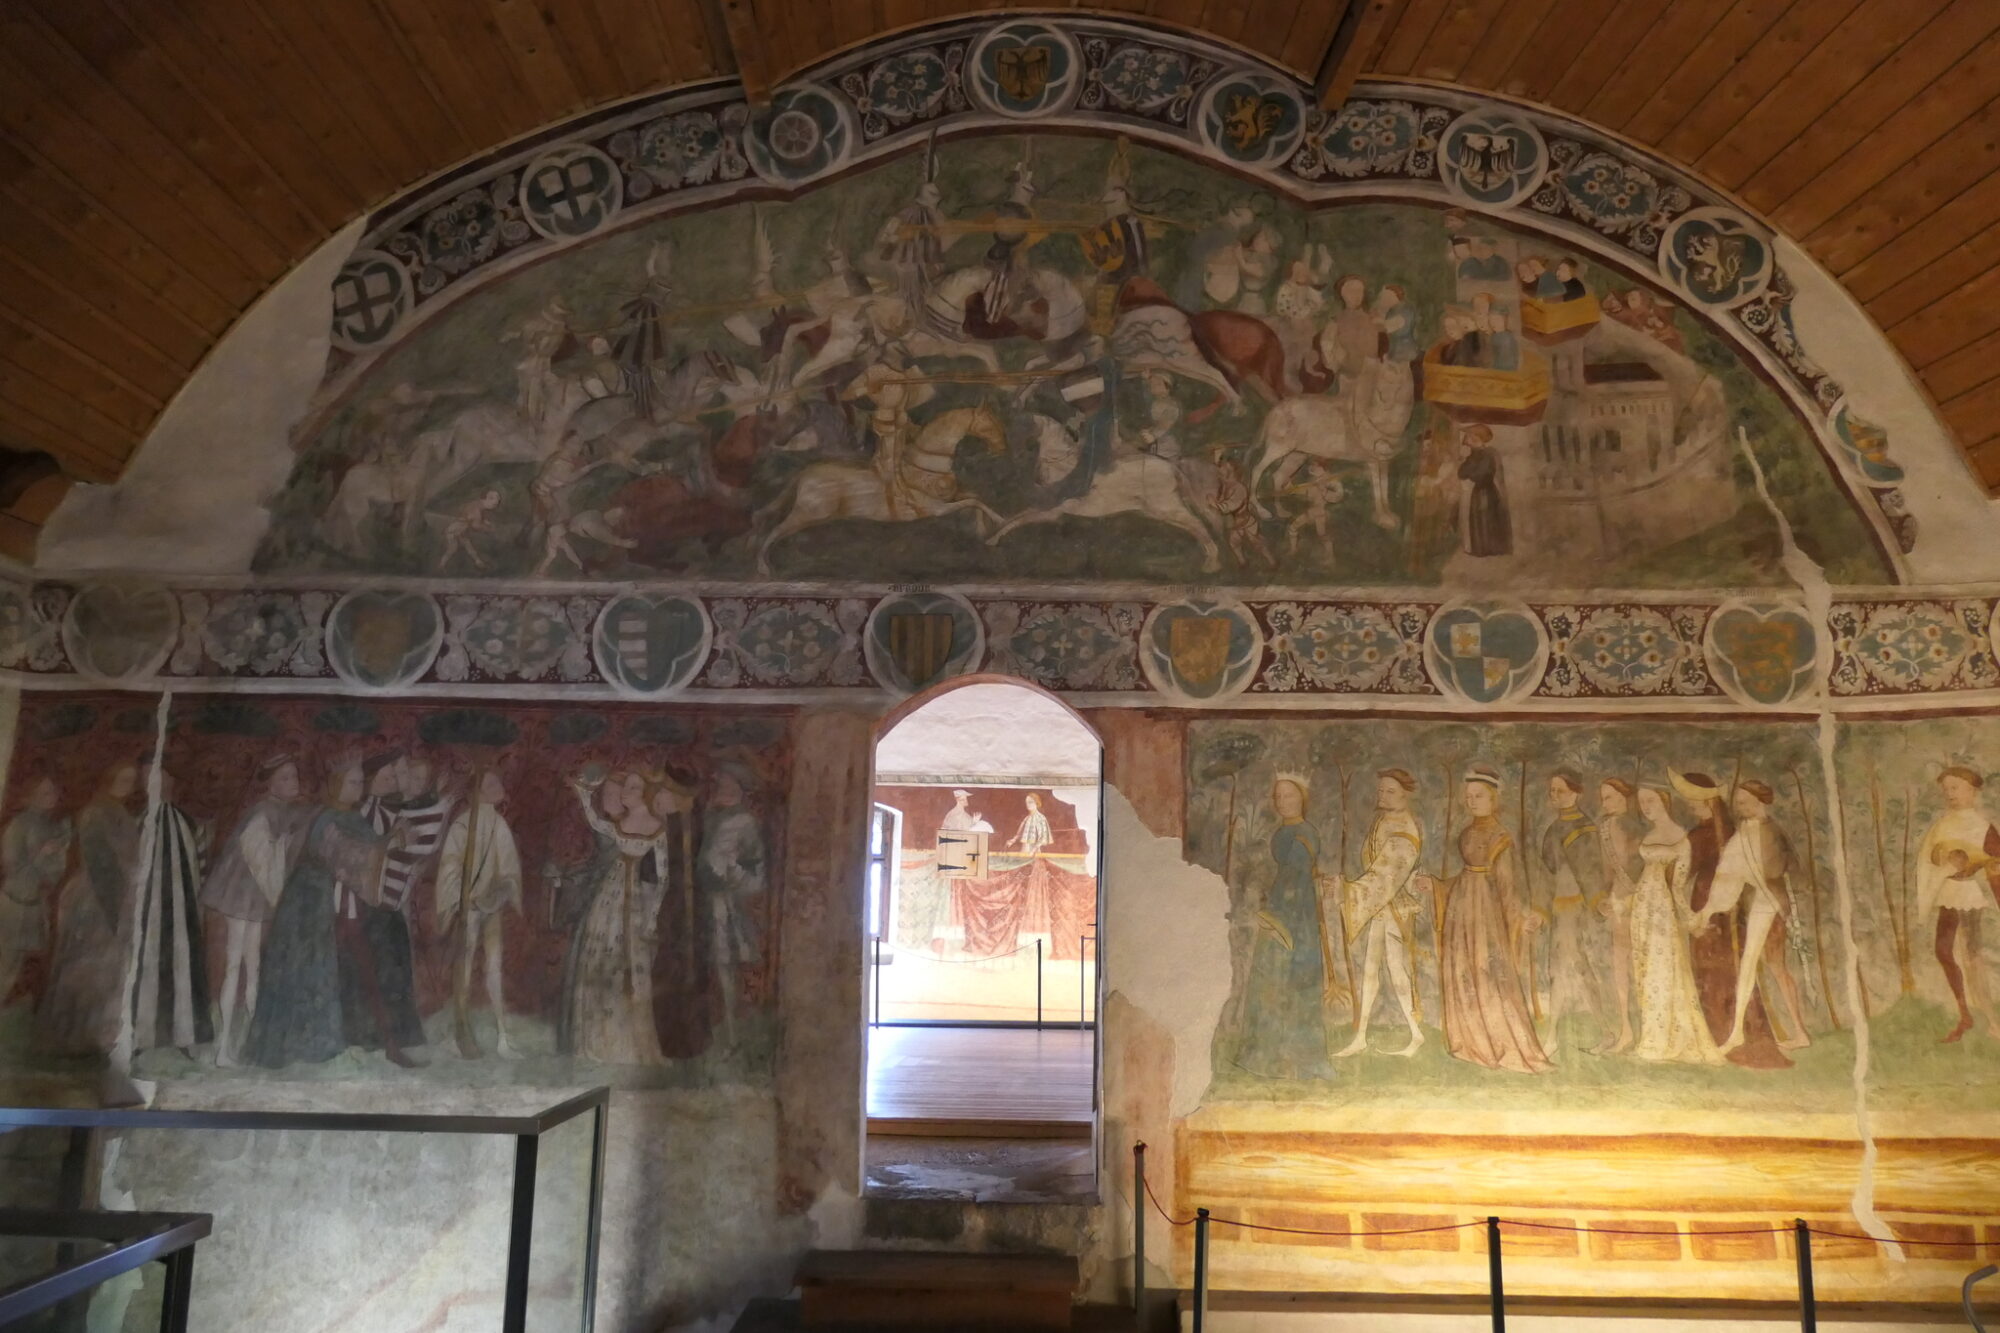 Fresco showing a Knights Tournament